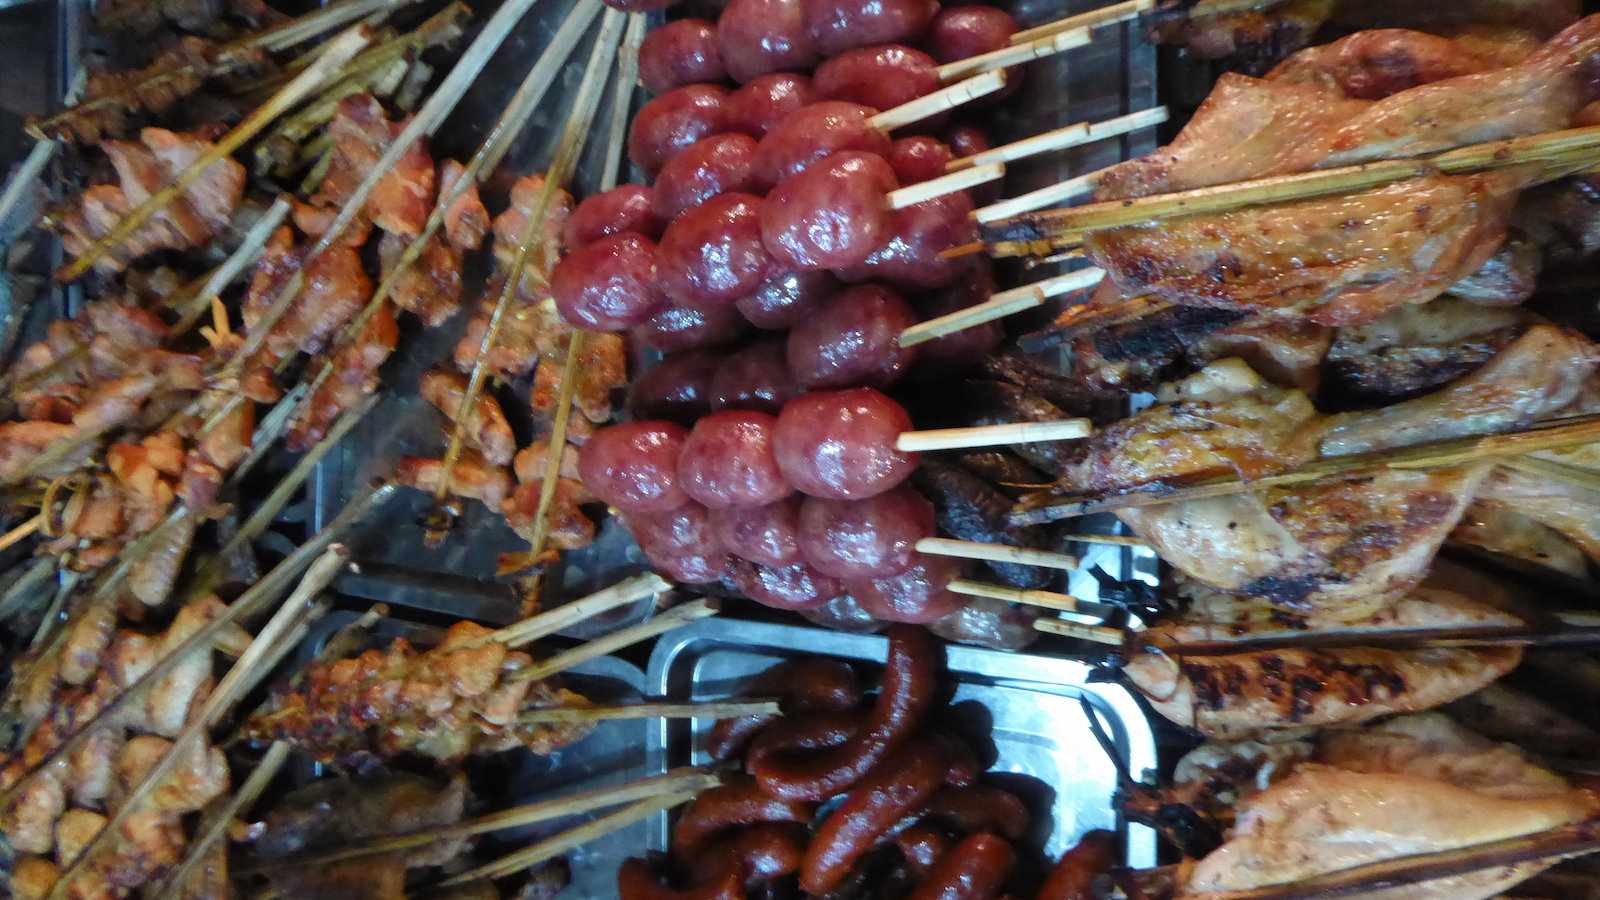 The barbecued meat sold at street food markets in Laos are usually more catered to westerners